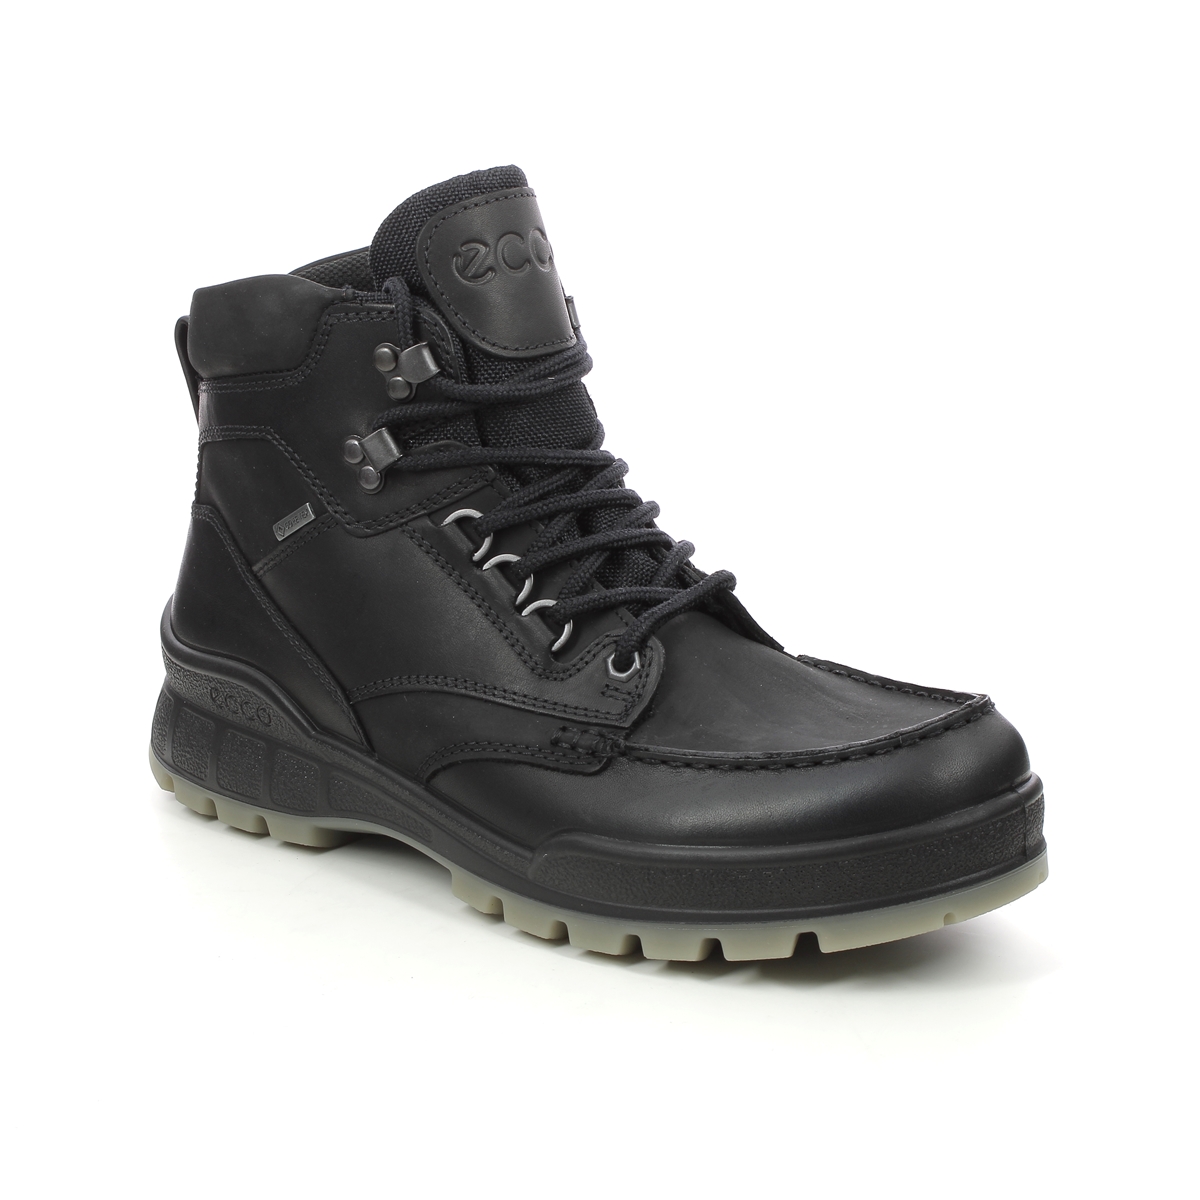 Ecco Track 25 Boot Gtx Black Leather Mens Outdoor Walking Boots 831704-51052 In Size 41 In Plain Black Leather